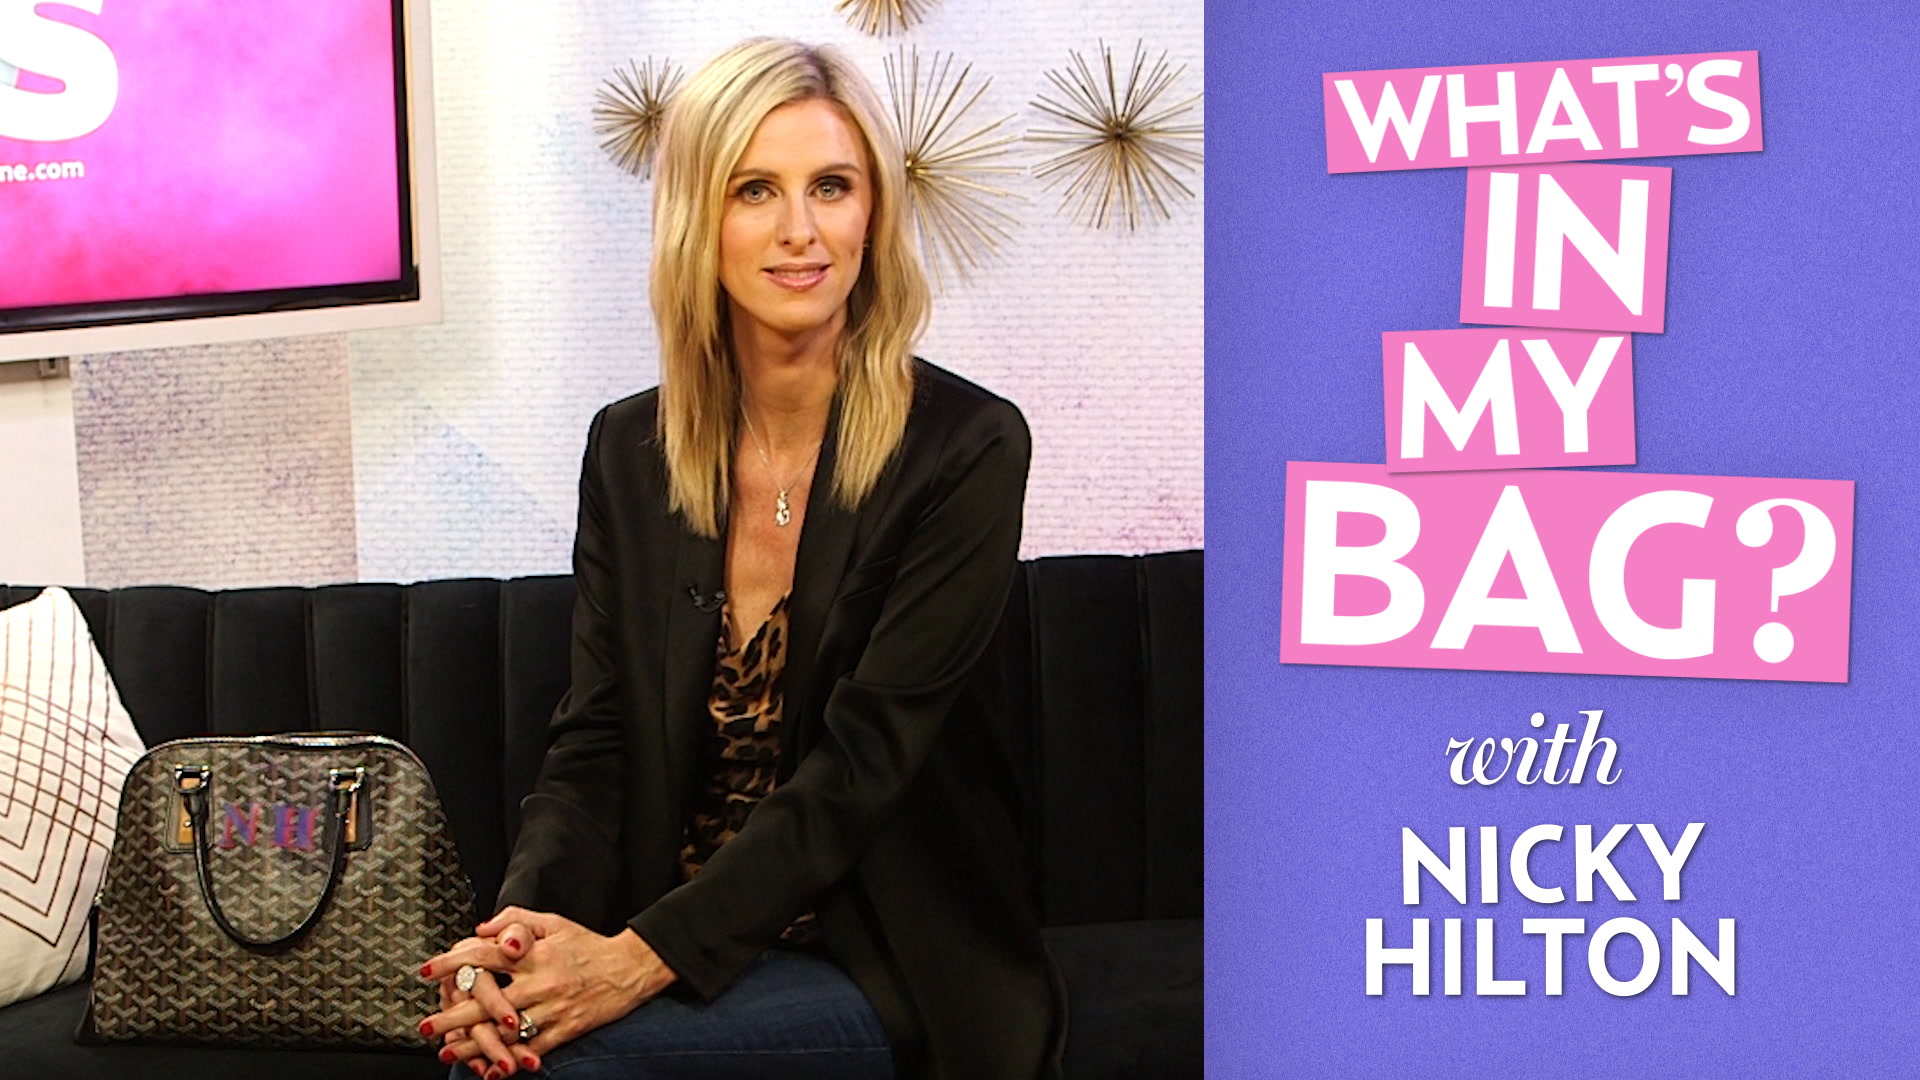 Nicky Hilton: What's in My Bag?